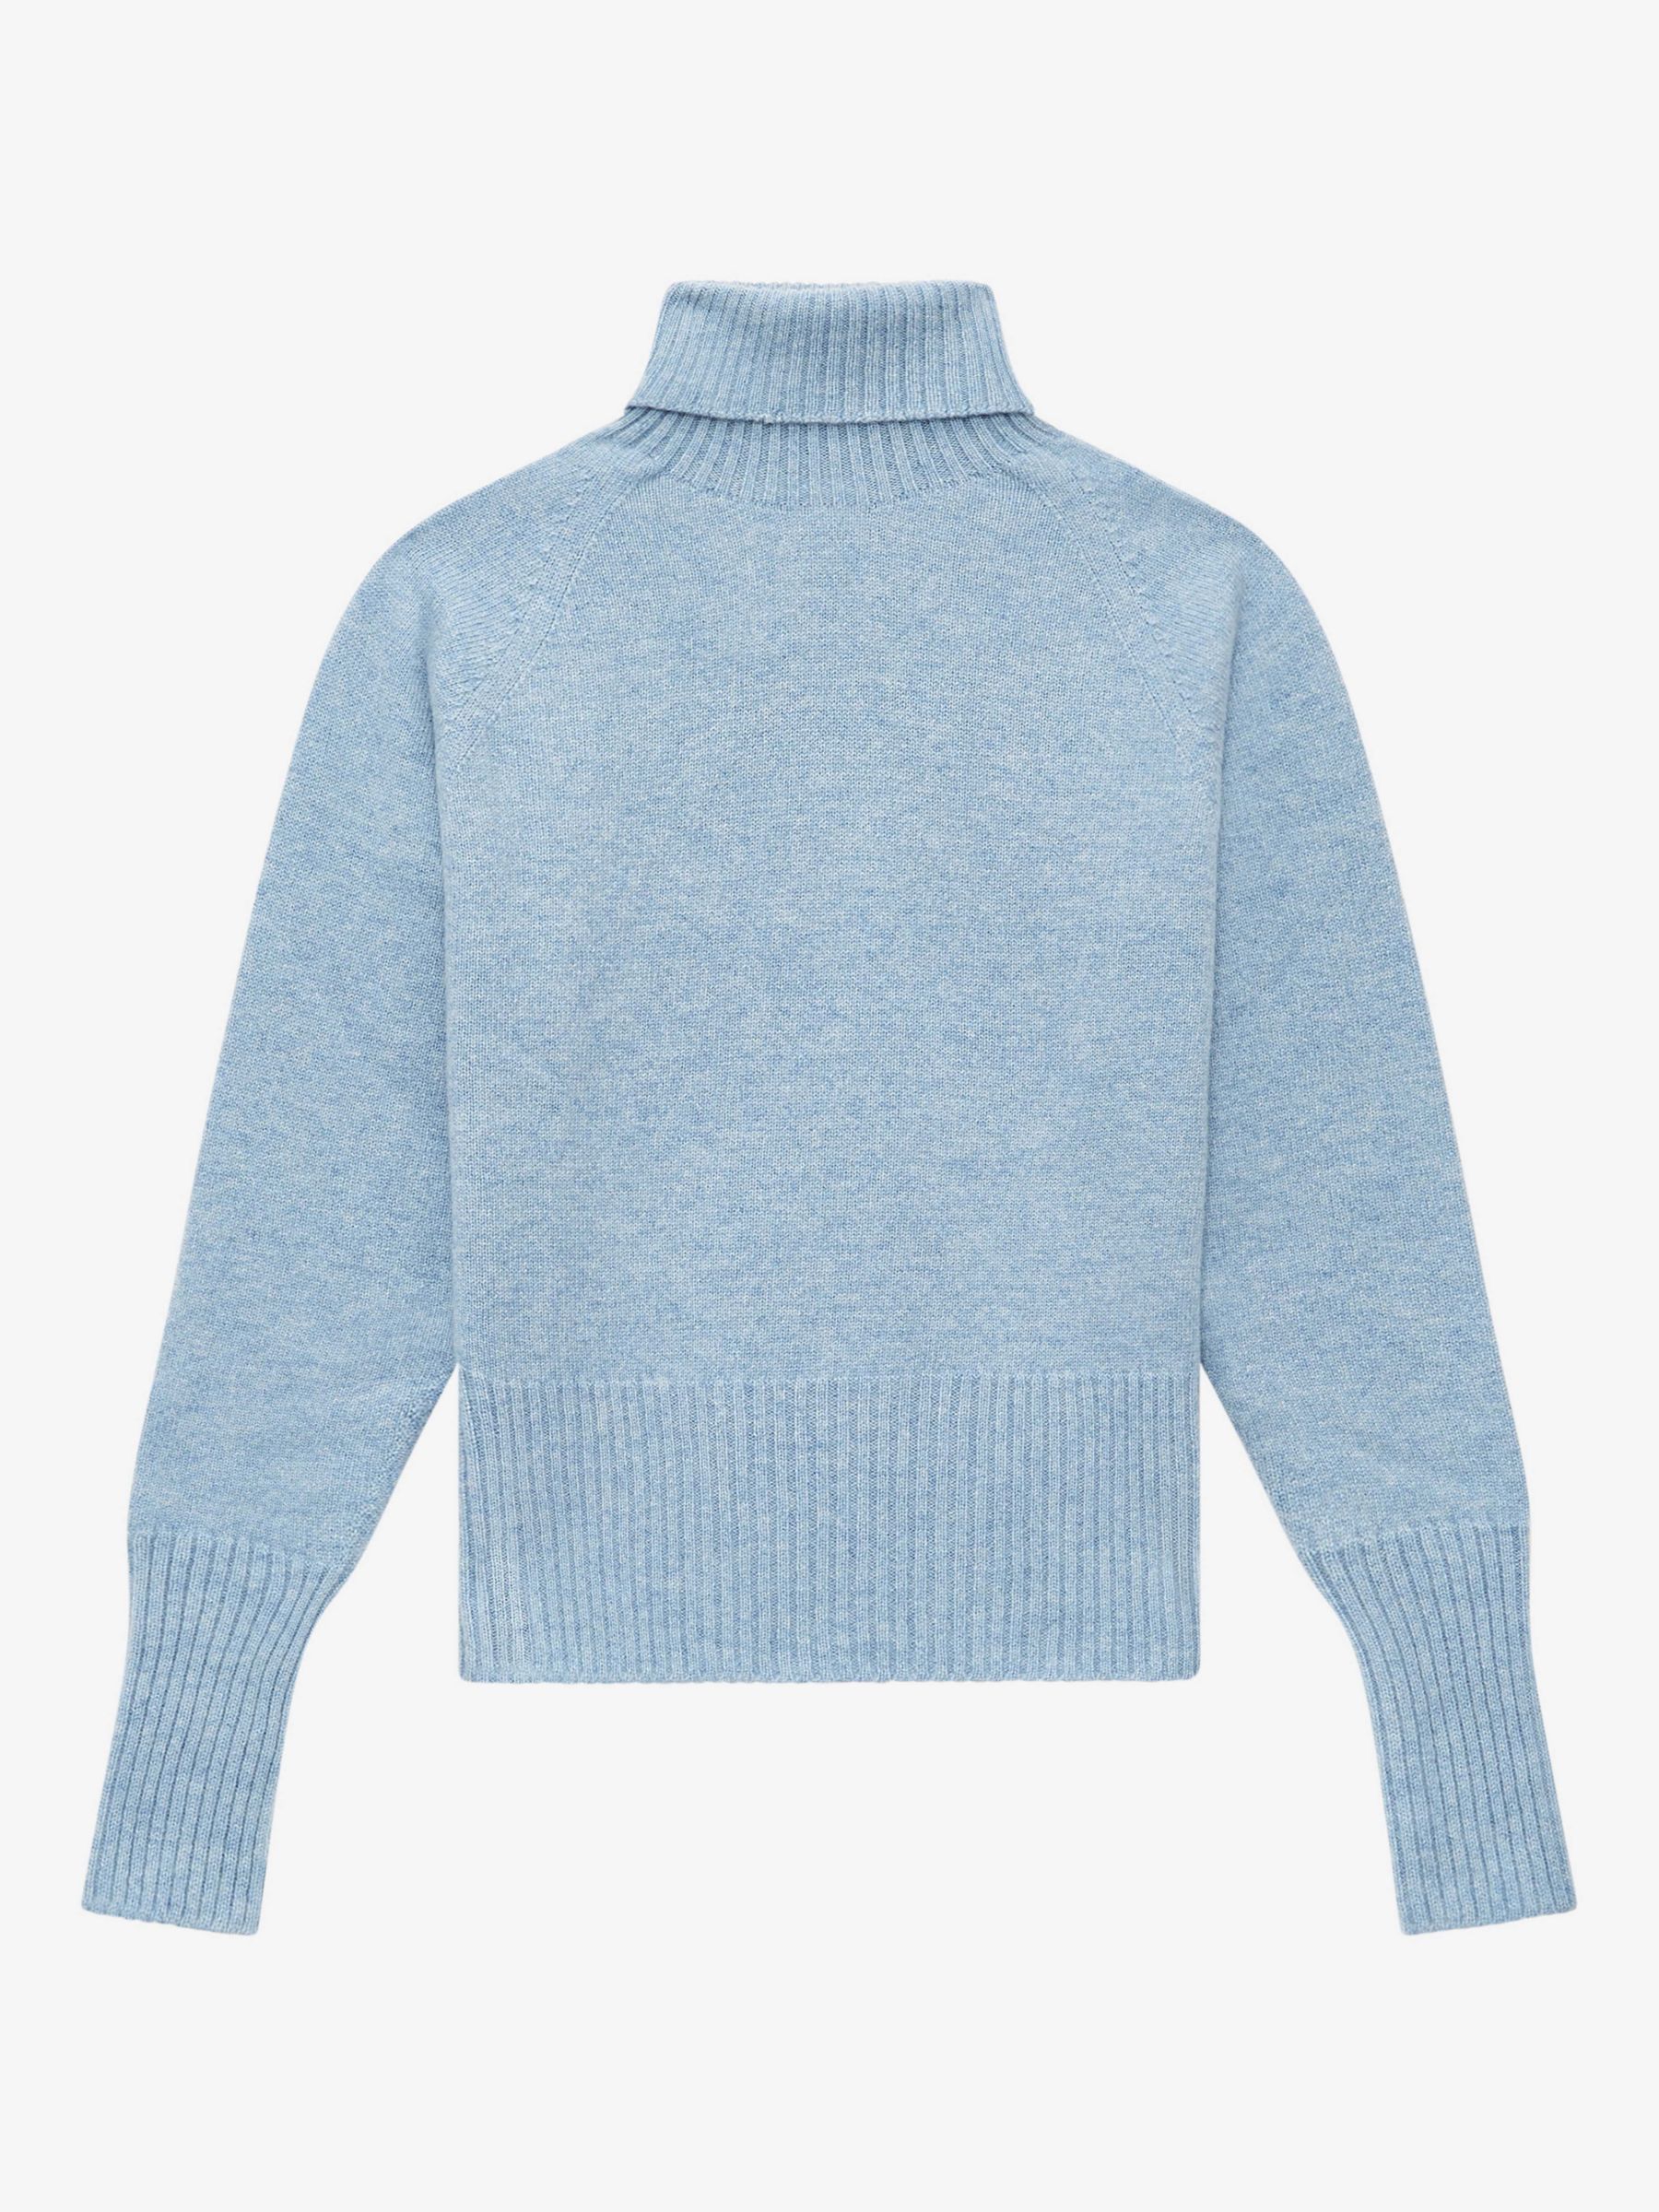 Buy Brora Cashmere Boxy Polo Neck Jumper Online at johnlewis.com